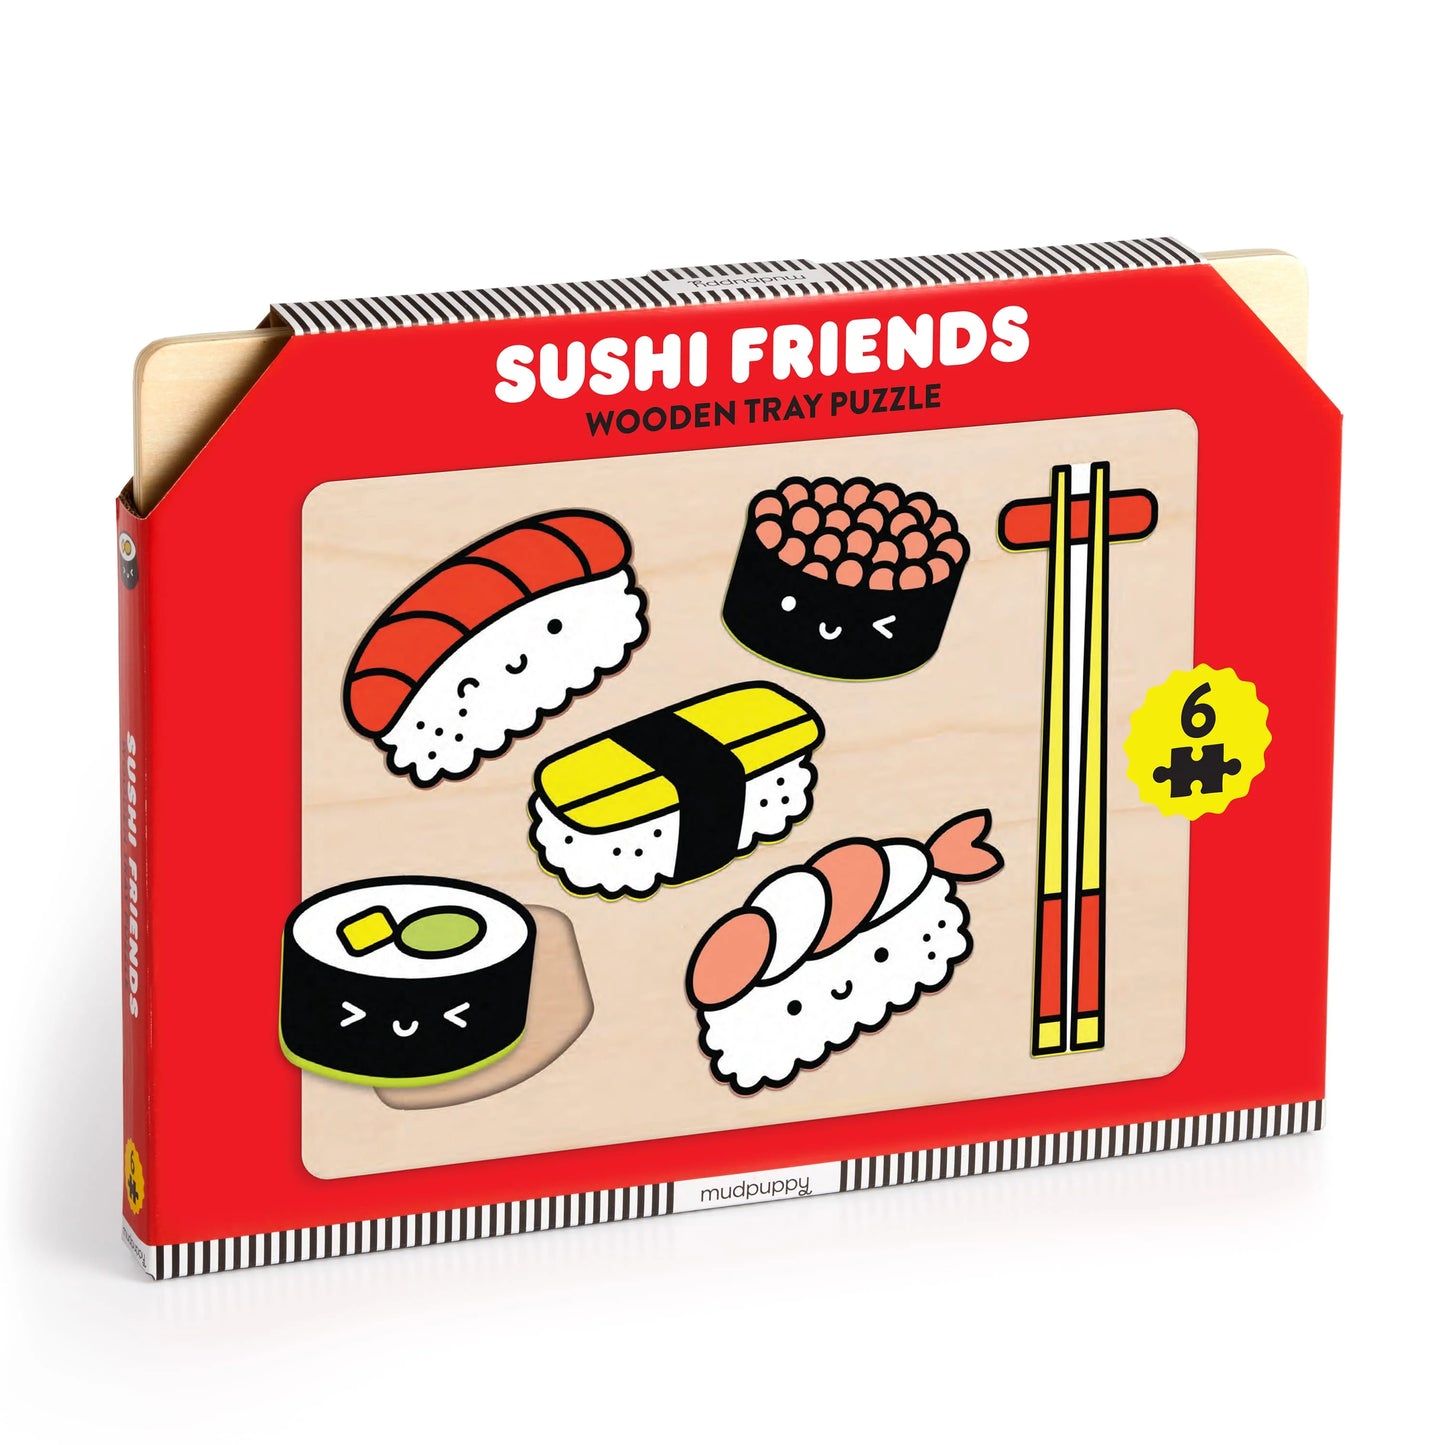 Sushi Friends // Wooden Tray Puzzle